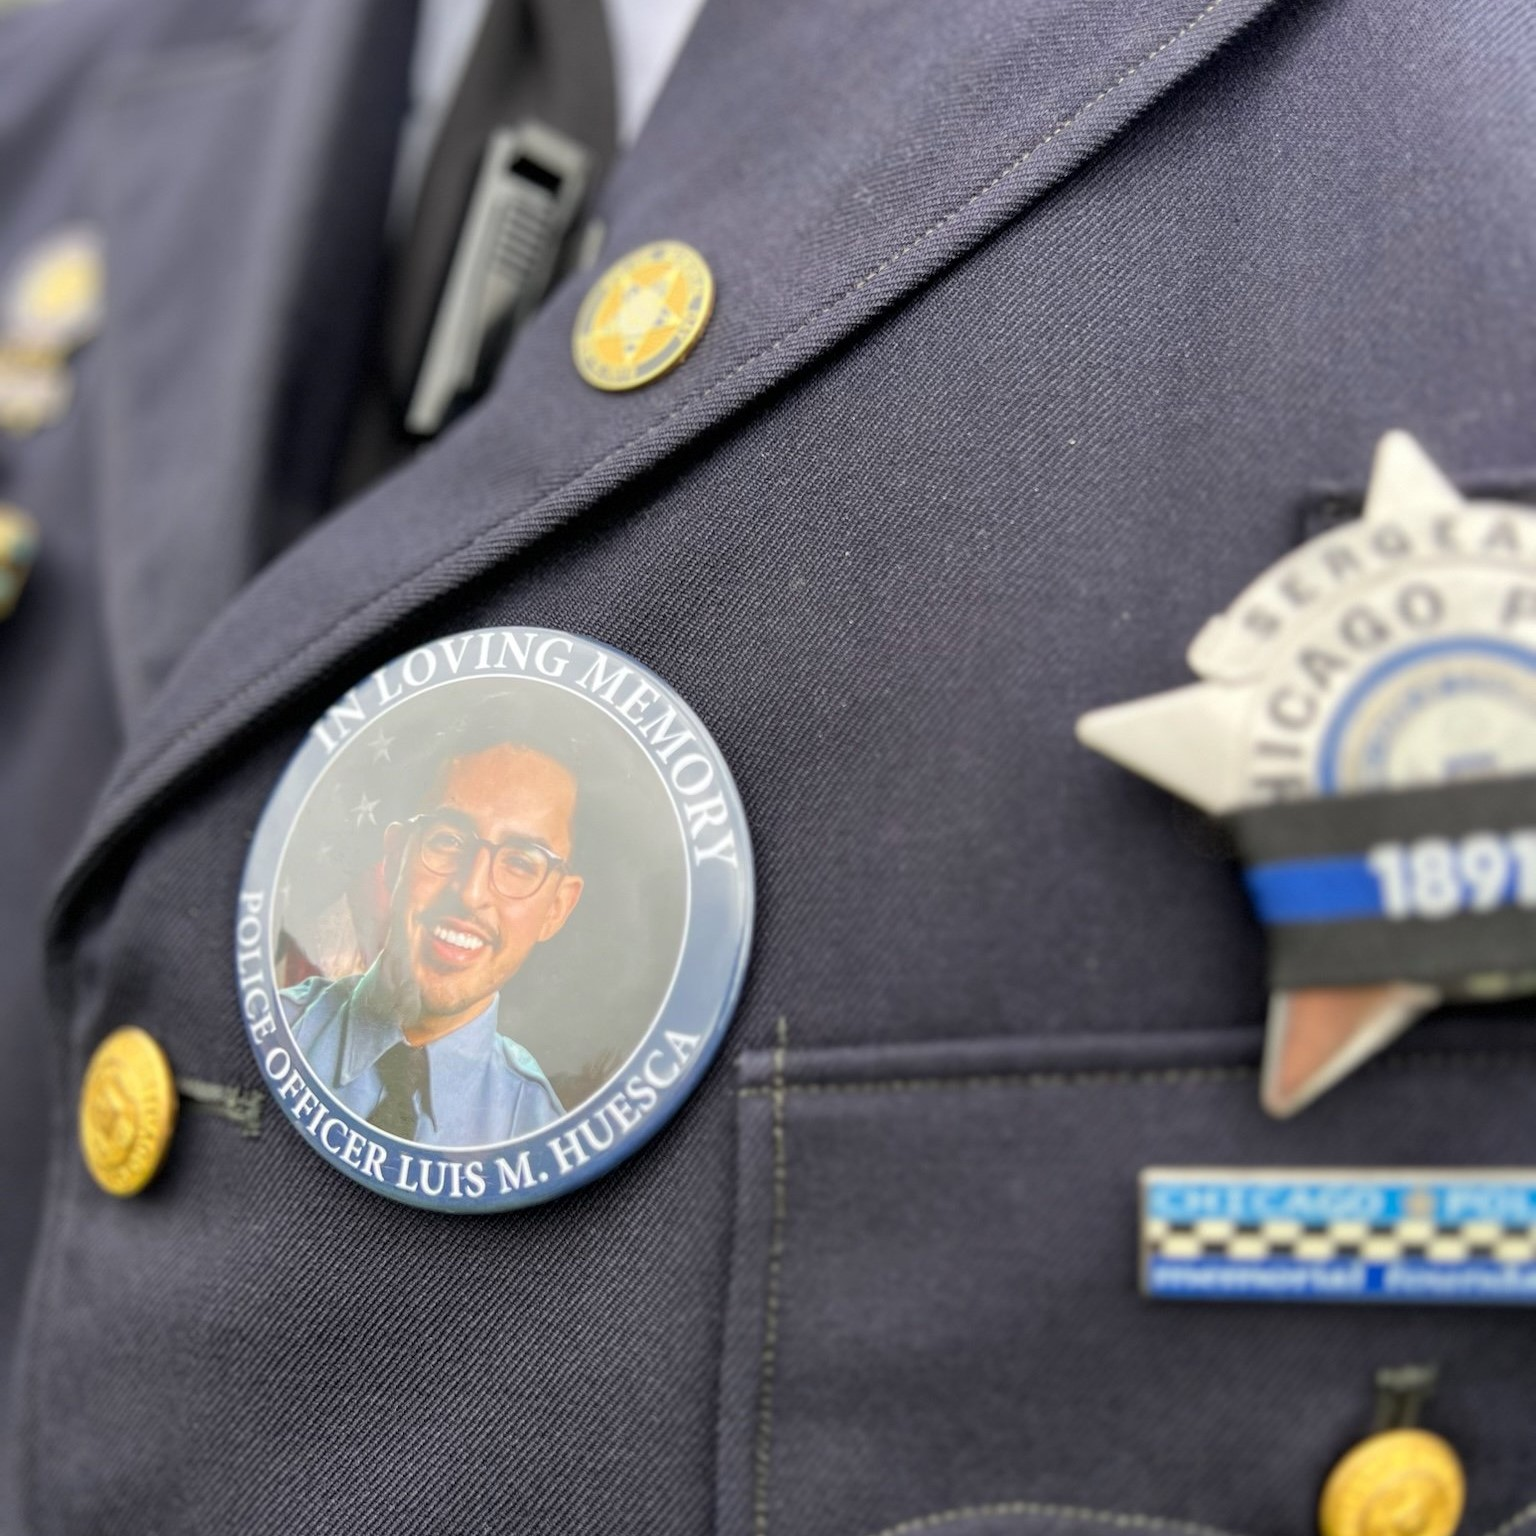 Funeral held for fallen Chicago police officer: 'You will not be forgotten'